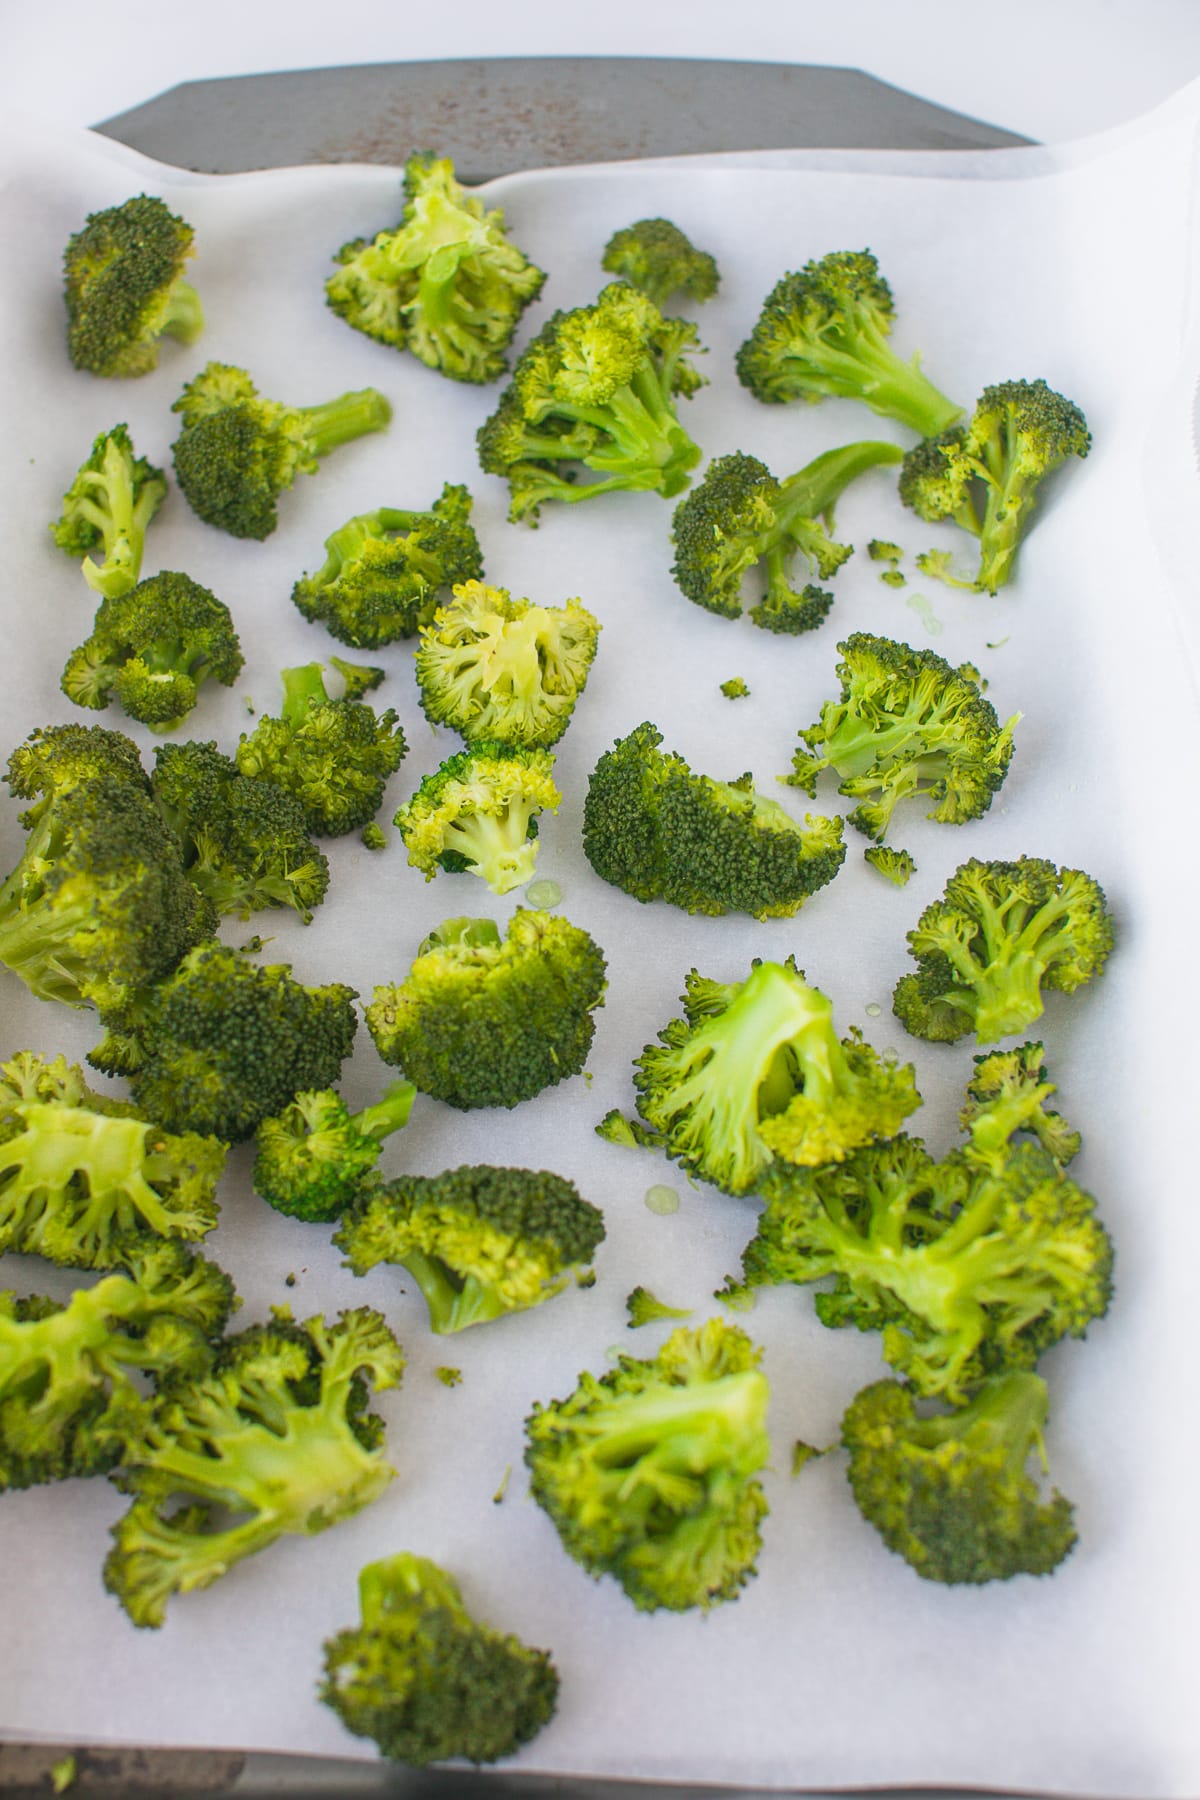 blanched broccoli on baking sheet.